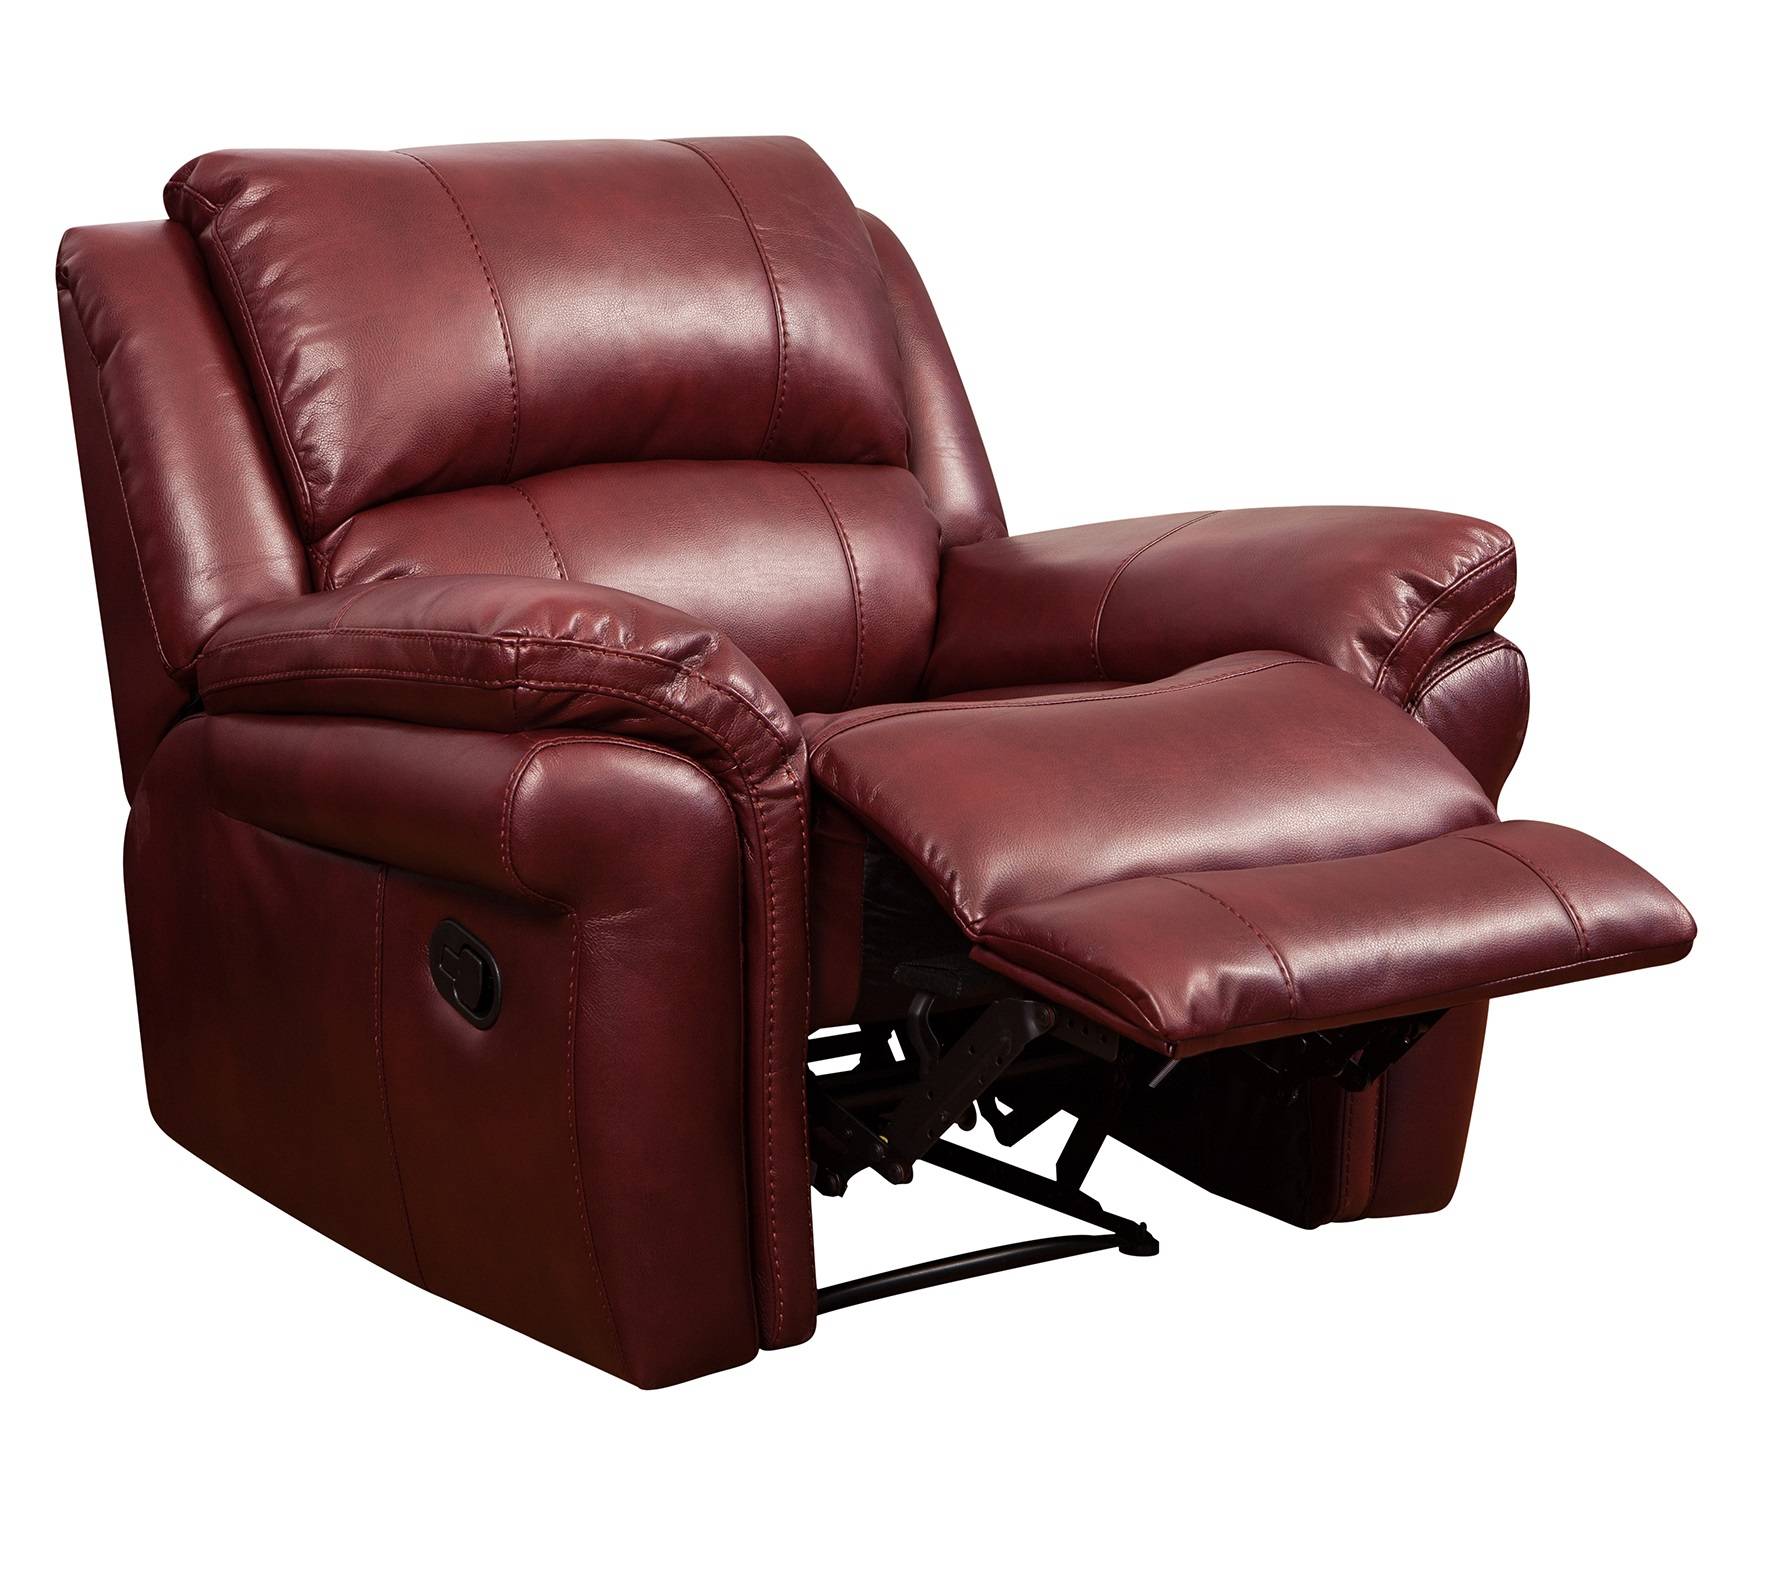 Modern American Style Furniture Rocker Functional Leather Recliner Sofa